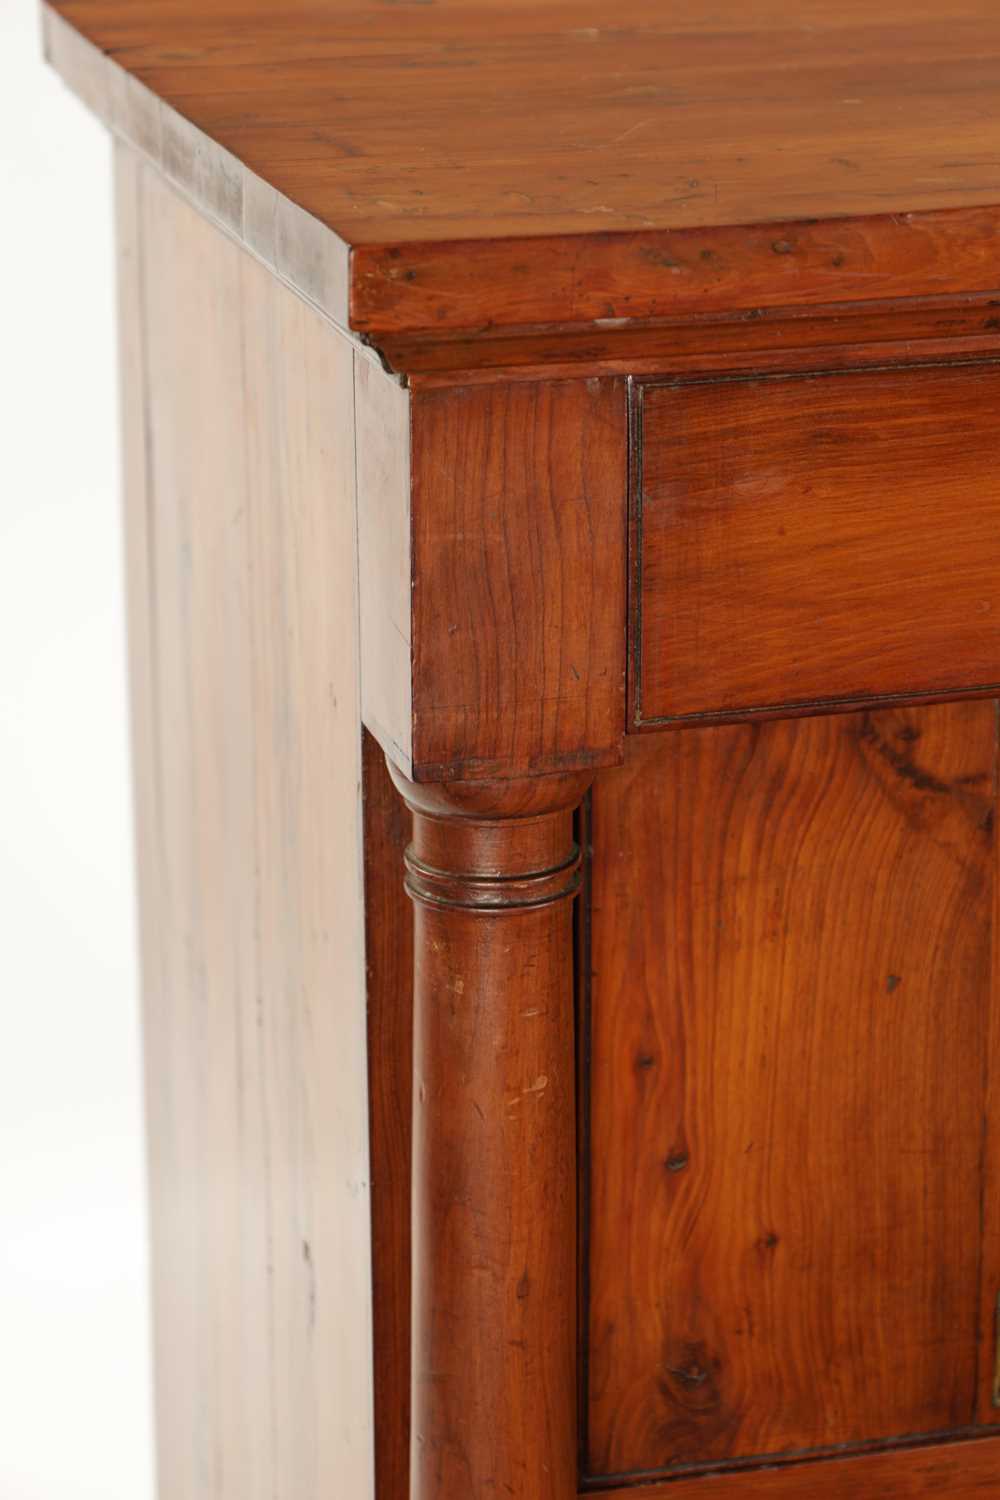 AN 18TH CENTURY EMPIRE STYLE YEW-WOOD BEDSIDE CABINET - Image 4 of 9